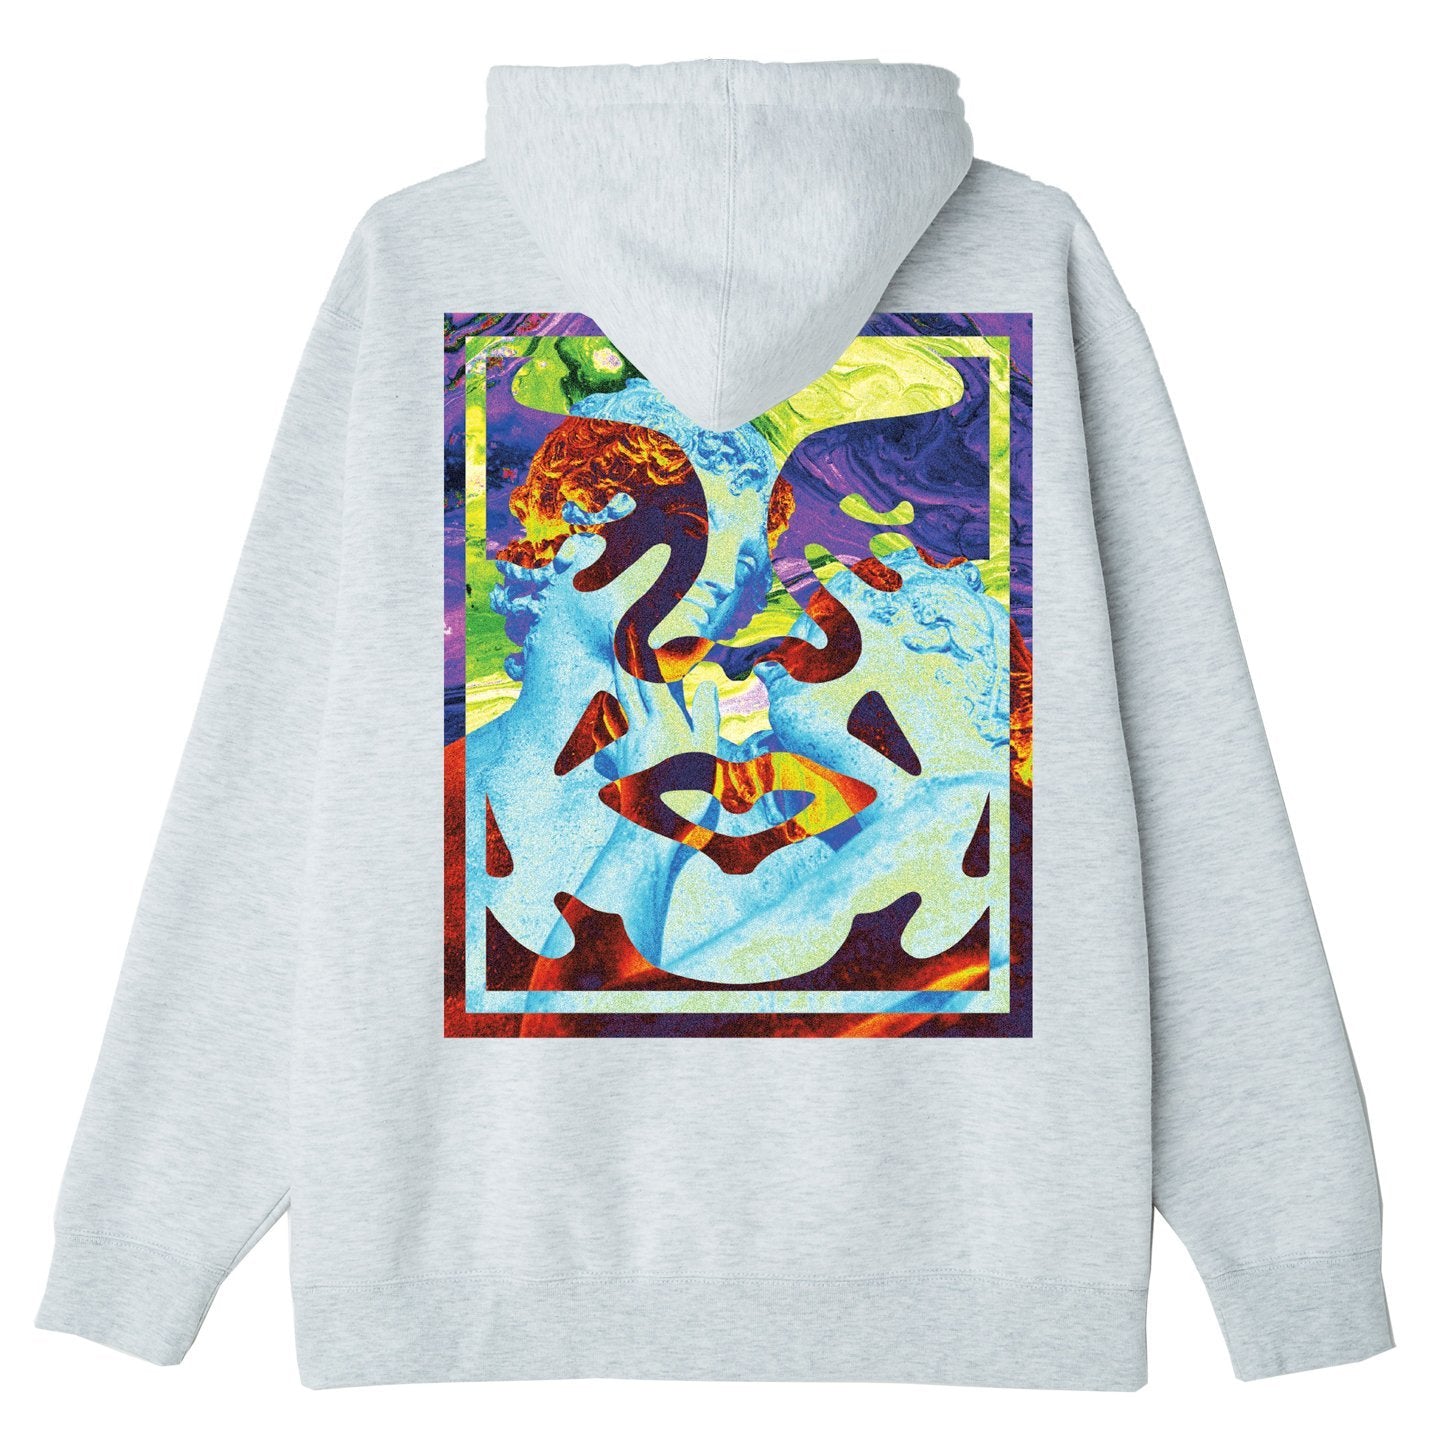 Obey - Statue Icon Box Fit Premium Hoody